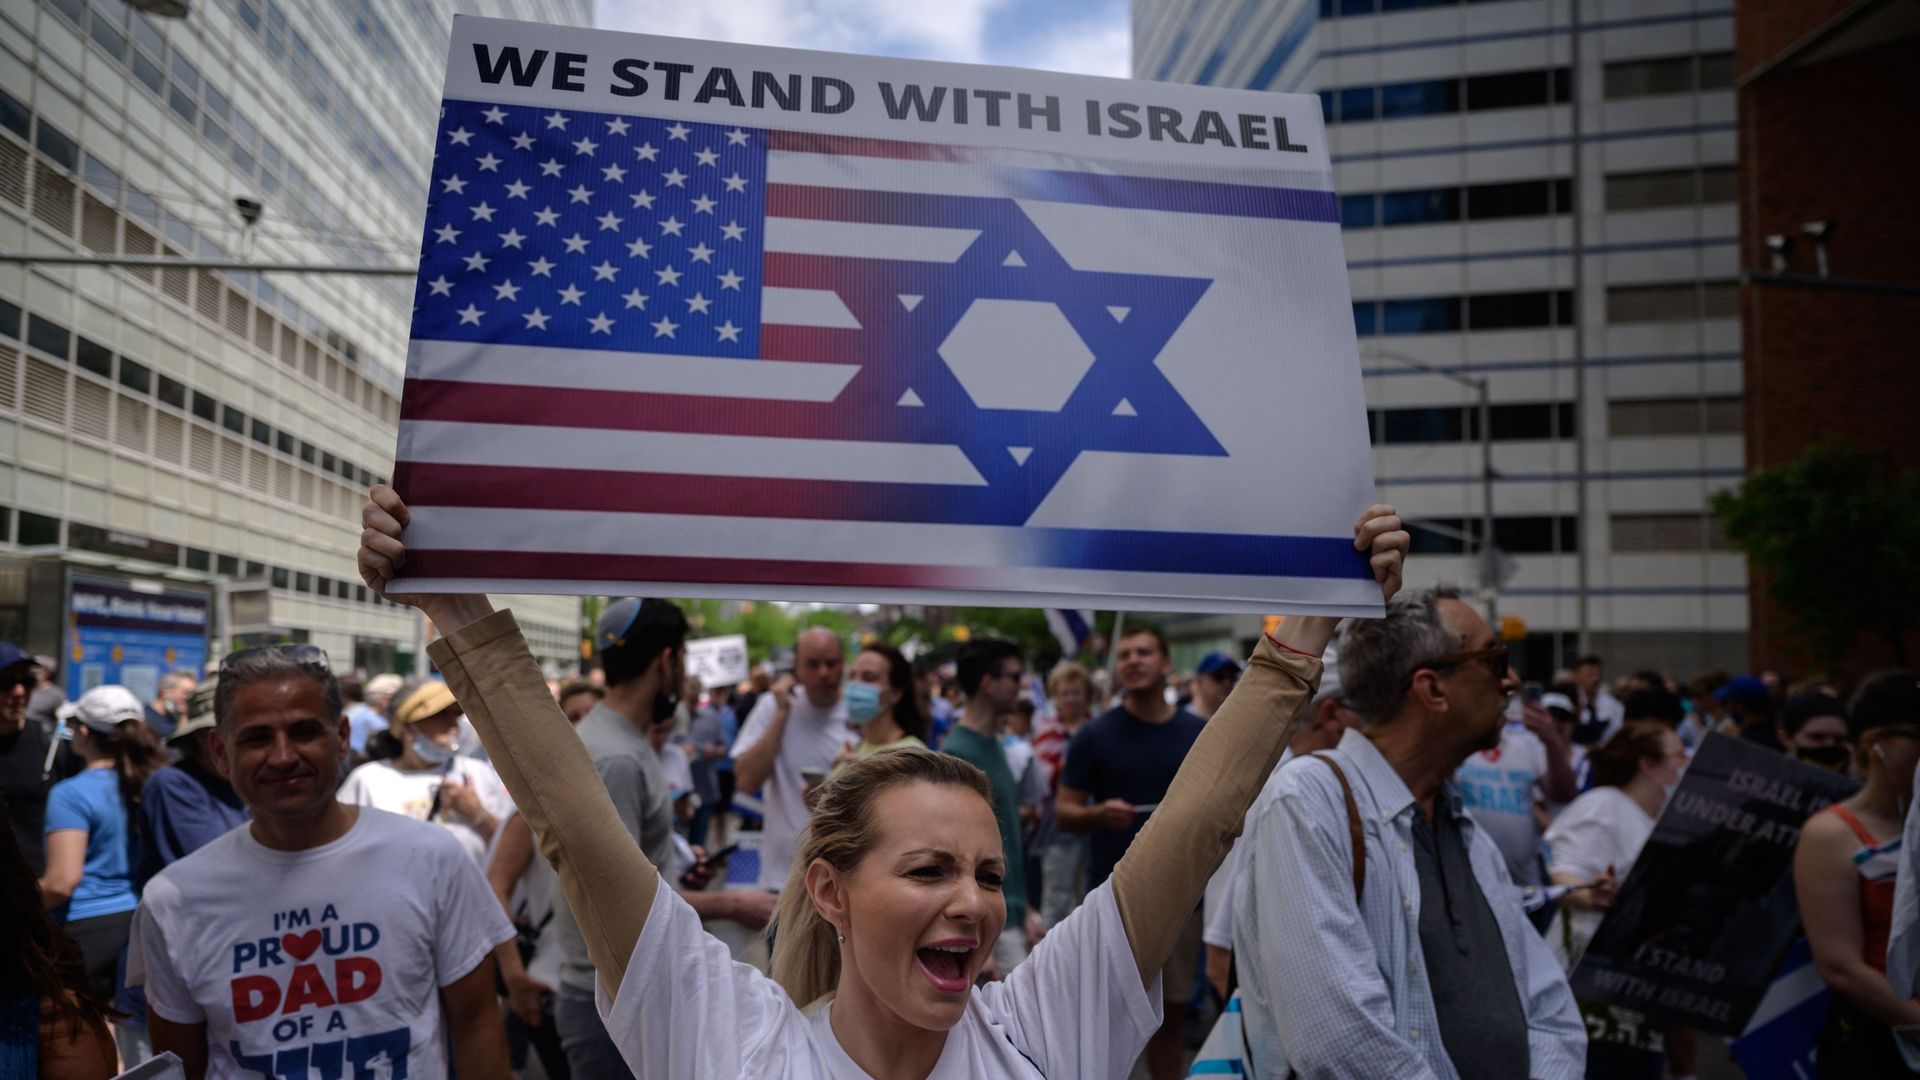 A pro-Israel woman attends a rally in New York City against anti-semitism.